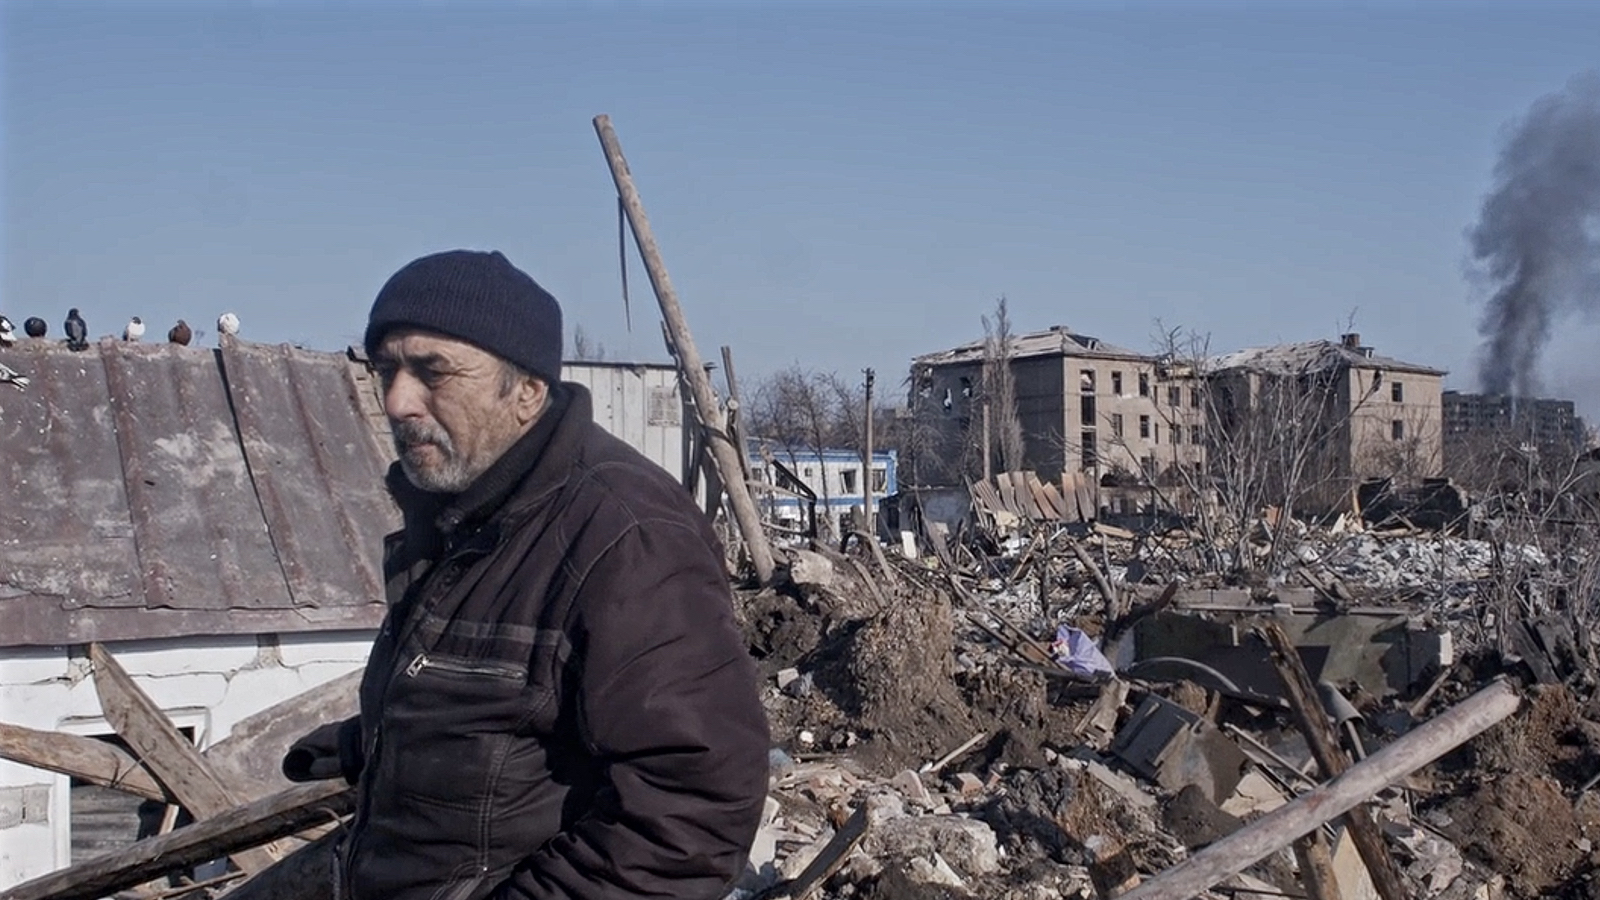 A serious looking man in a stocking cap walks before building rubble